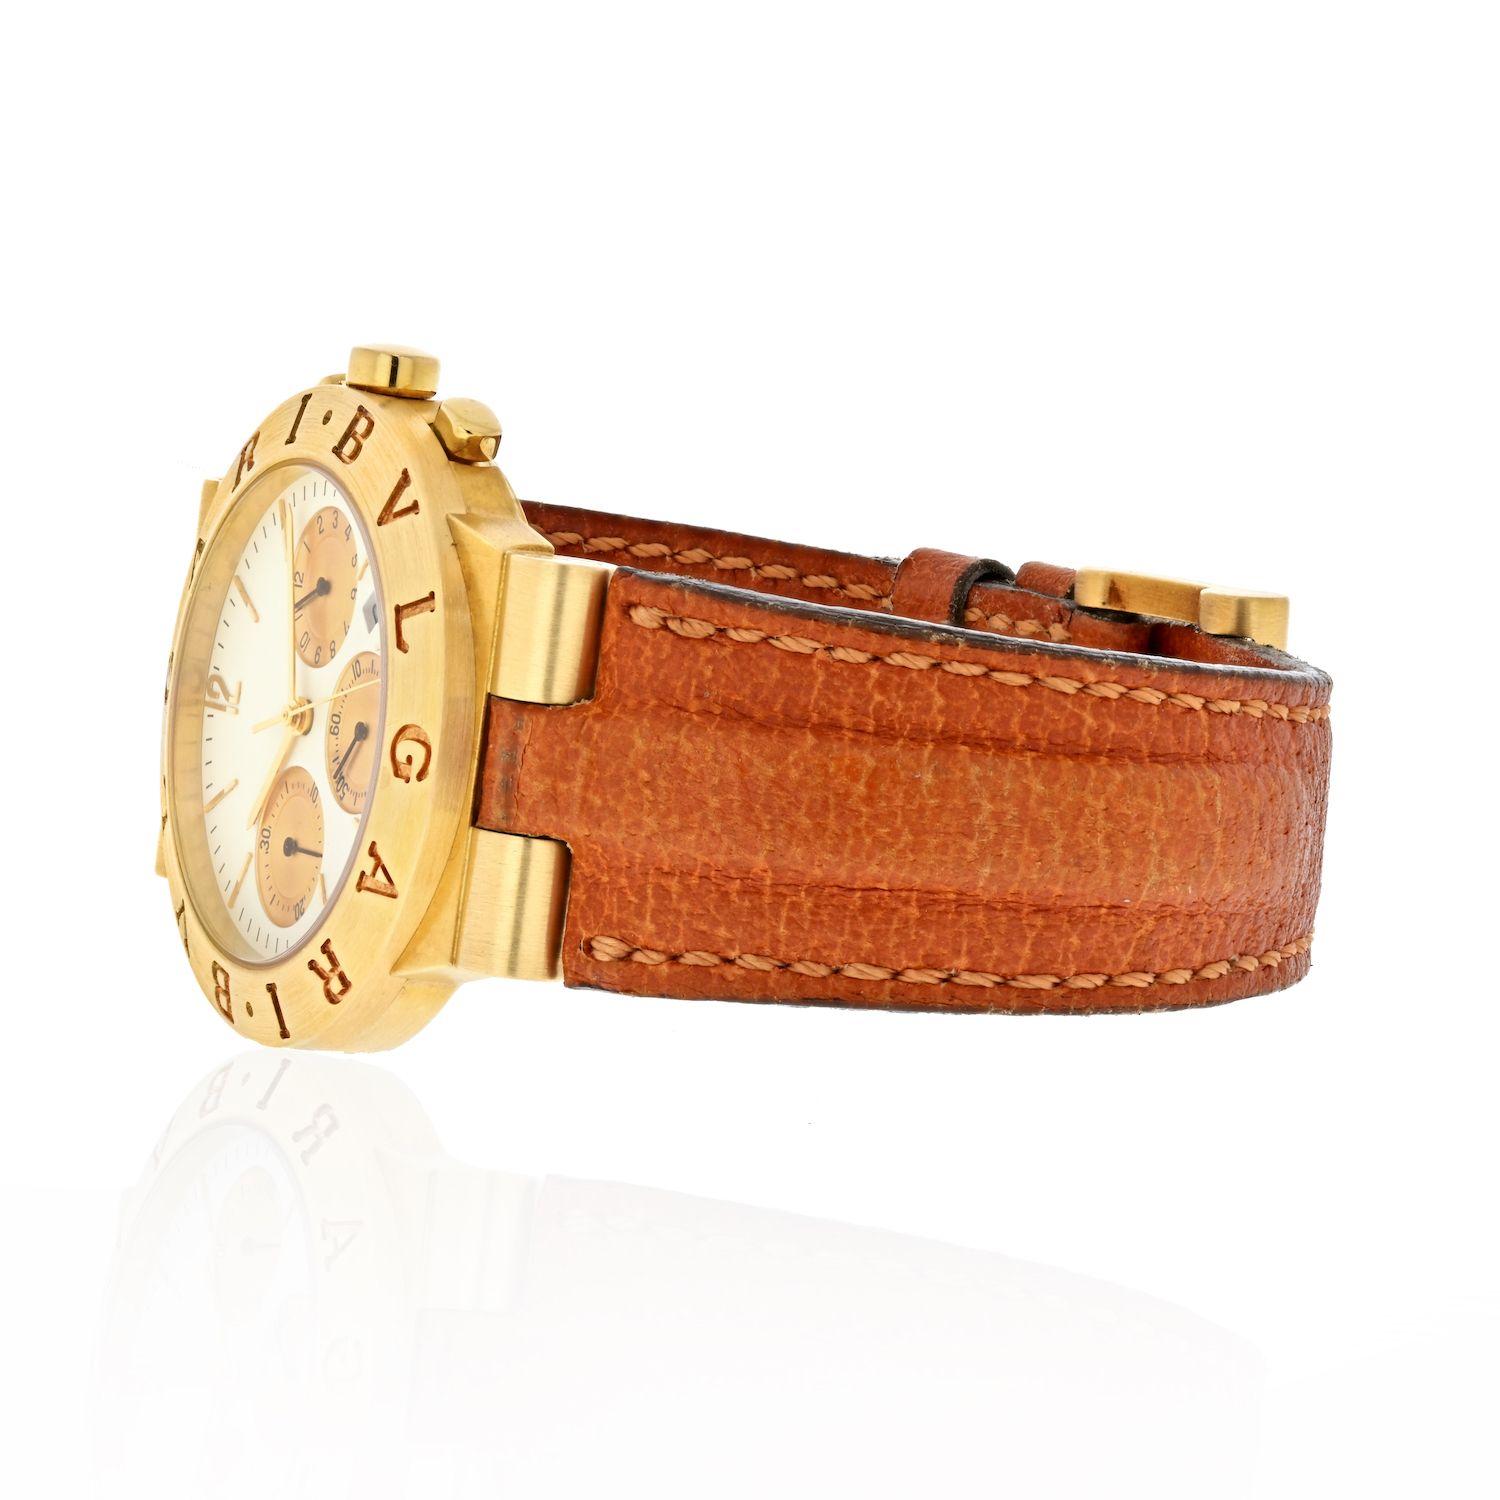 Bulgari (Bvlgari) Diagono 18k Yellow Gold Chronograph CH 35 G (CH35G) - Quartz movement. 18k yellow gold case (35mm diameter). White dial with gold subdials; date between 4 & 5 o'clock. Brown tan strap band with 18k yellow gold buckle. Pre-owned